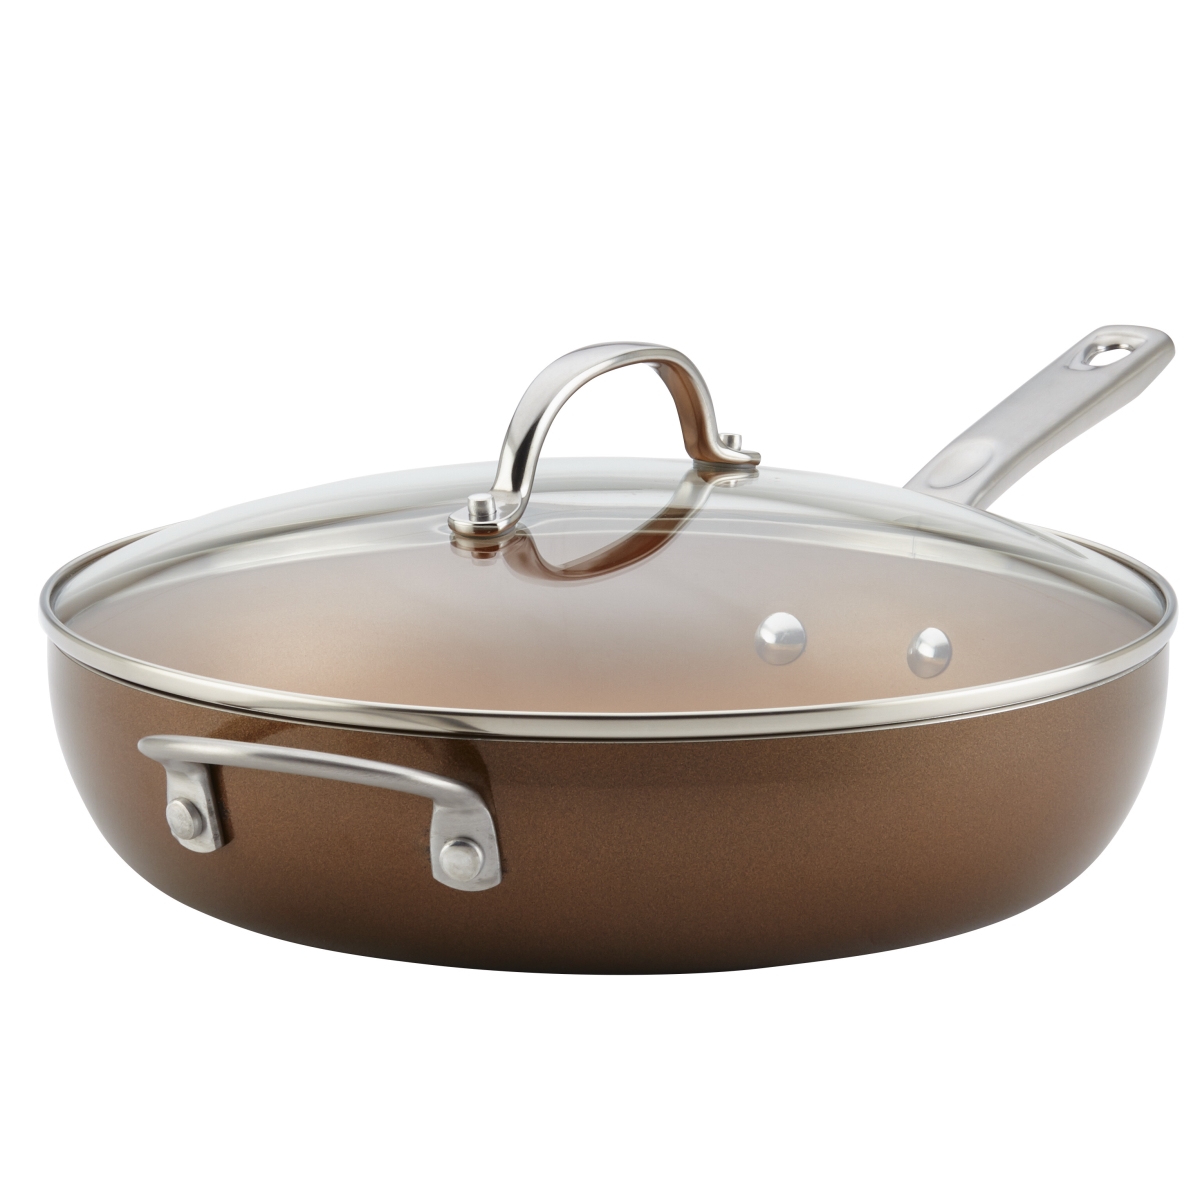 Picture of Ayesha Curry 10764 Porcelain Enamel Nonstick Covered Deep Skillet with Helper Handle, 12 in. - Brown Sugar